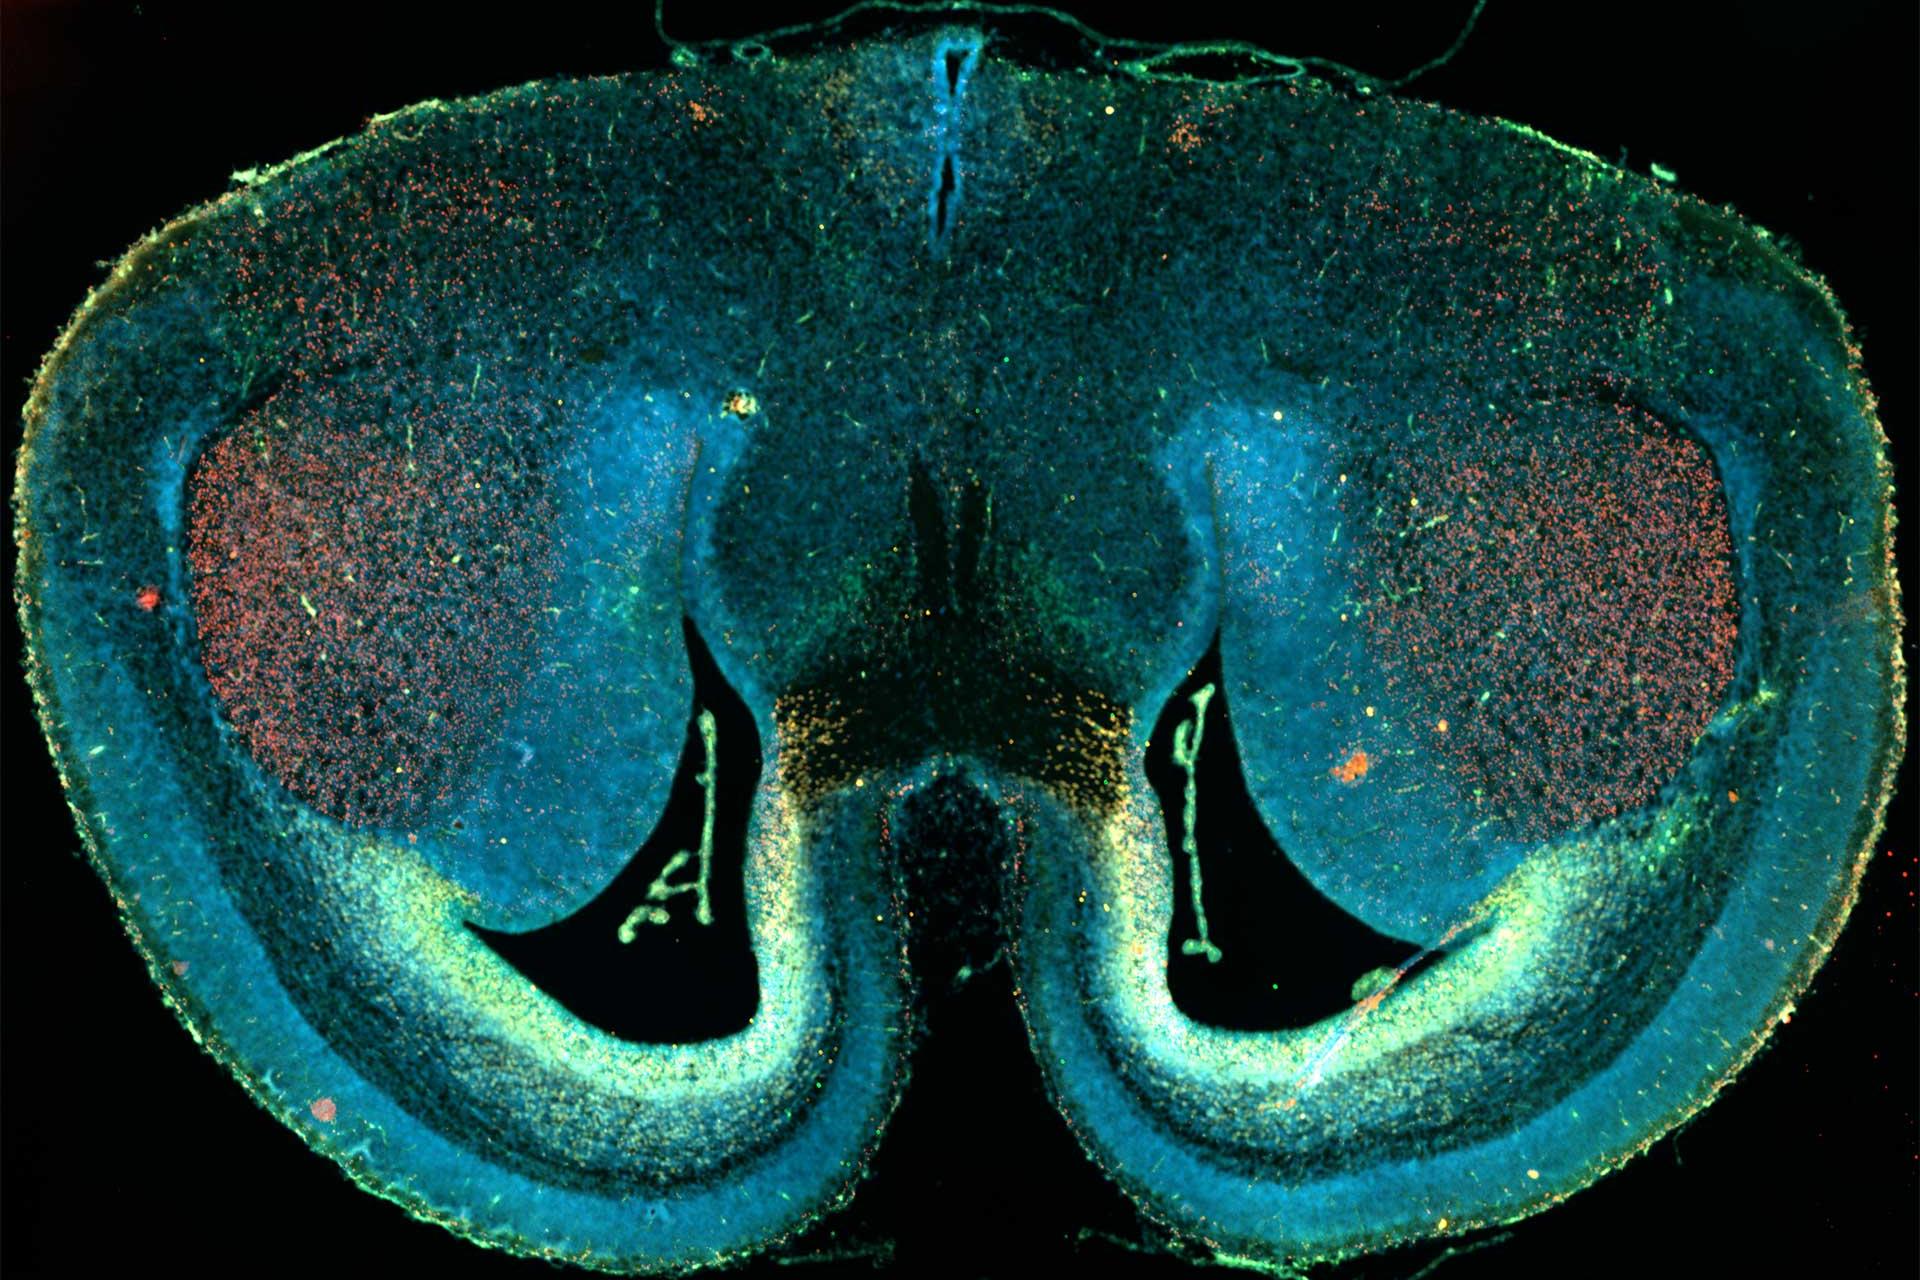 Mouse brain slice, captured using widefield fluorescence microscopy and tiling. Sample courtesy of D. Mi, School of Life Sciences, Tsinghua University, China